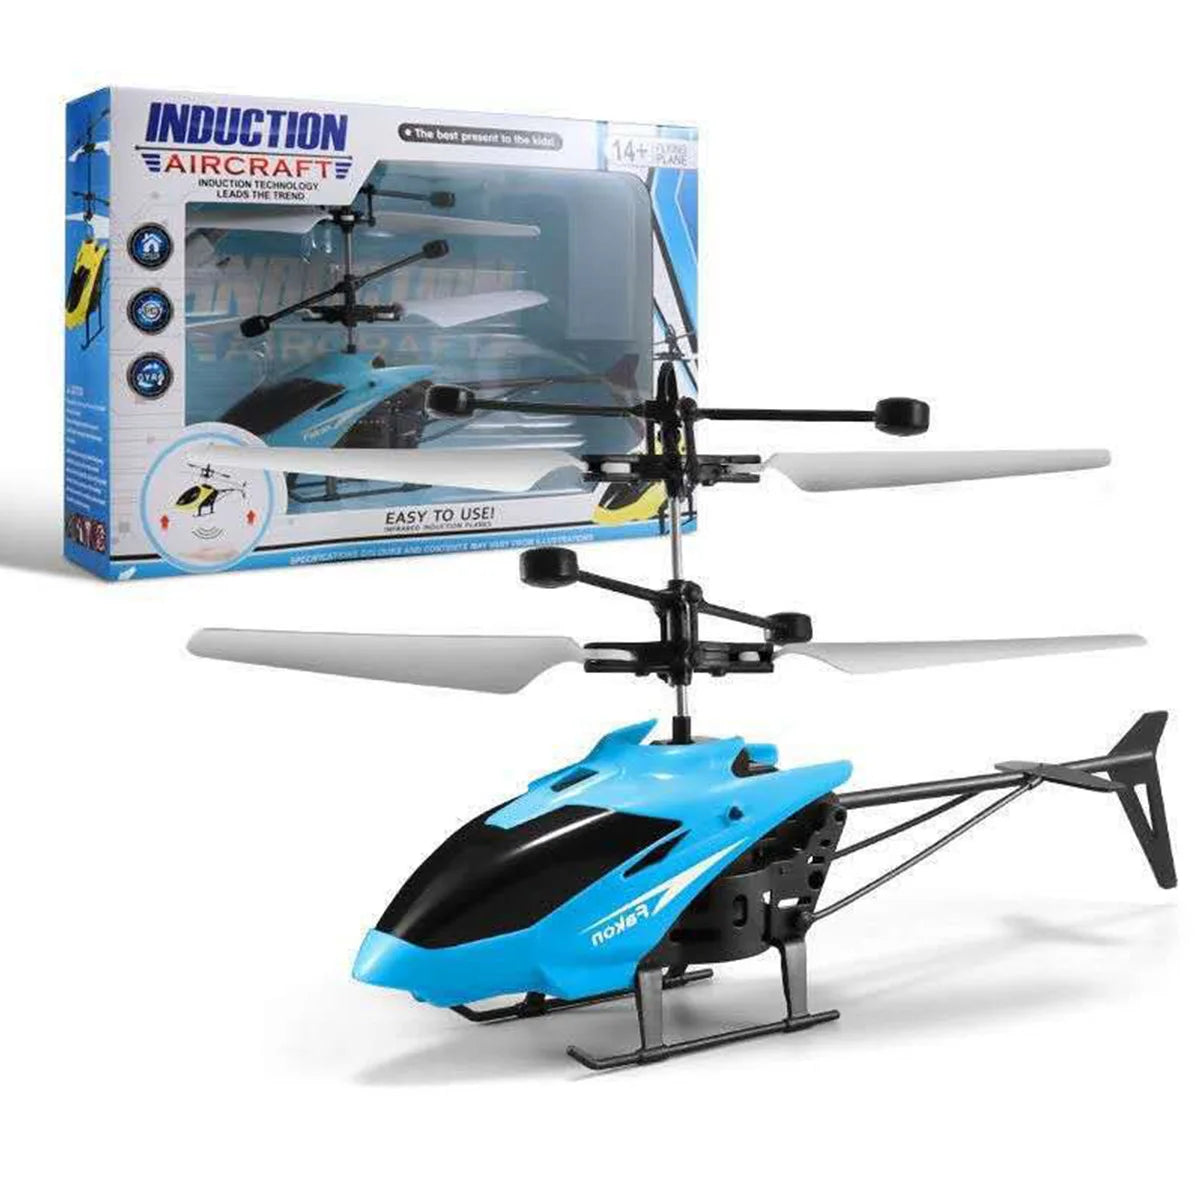 CY-38 Rc Helicopter, INDUCTION Ot AIRCRAFTE Moucior Fildd Uud